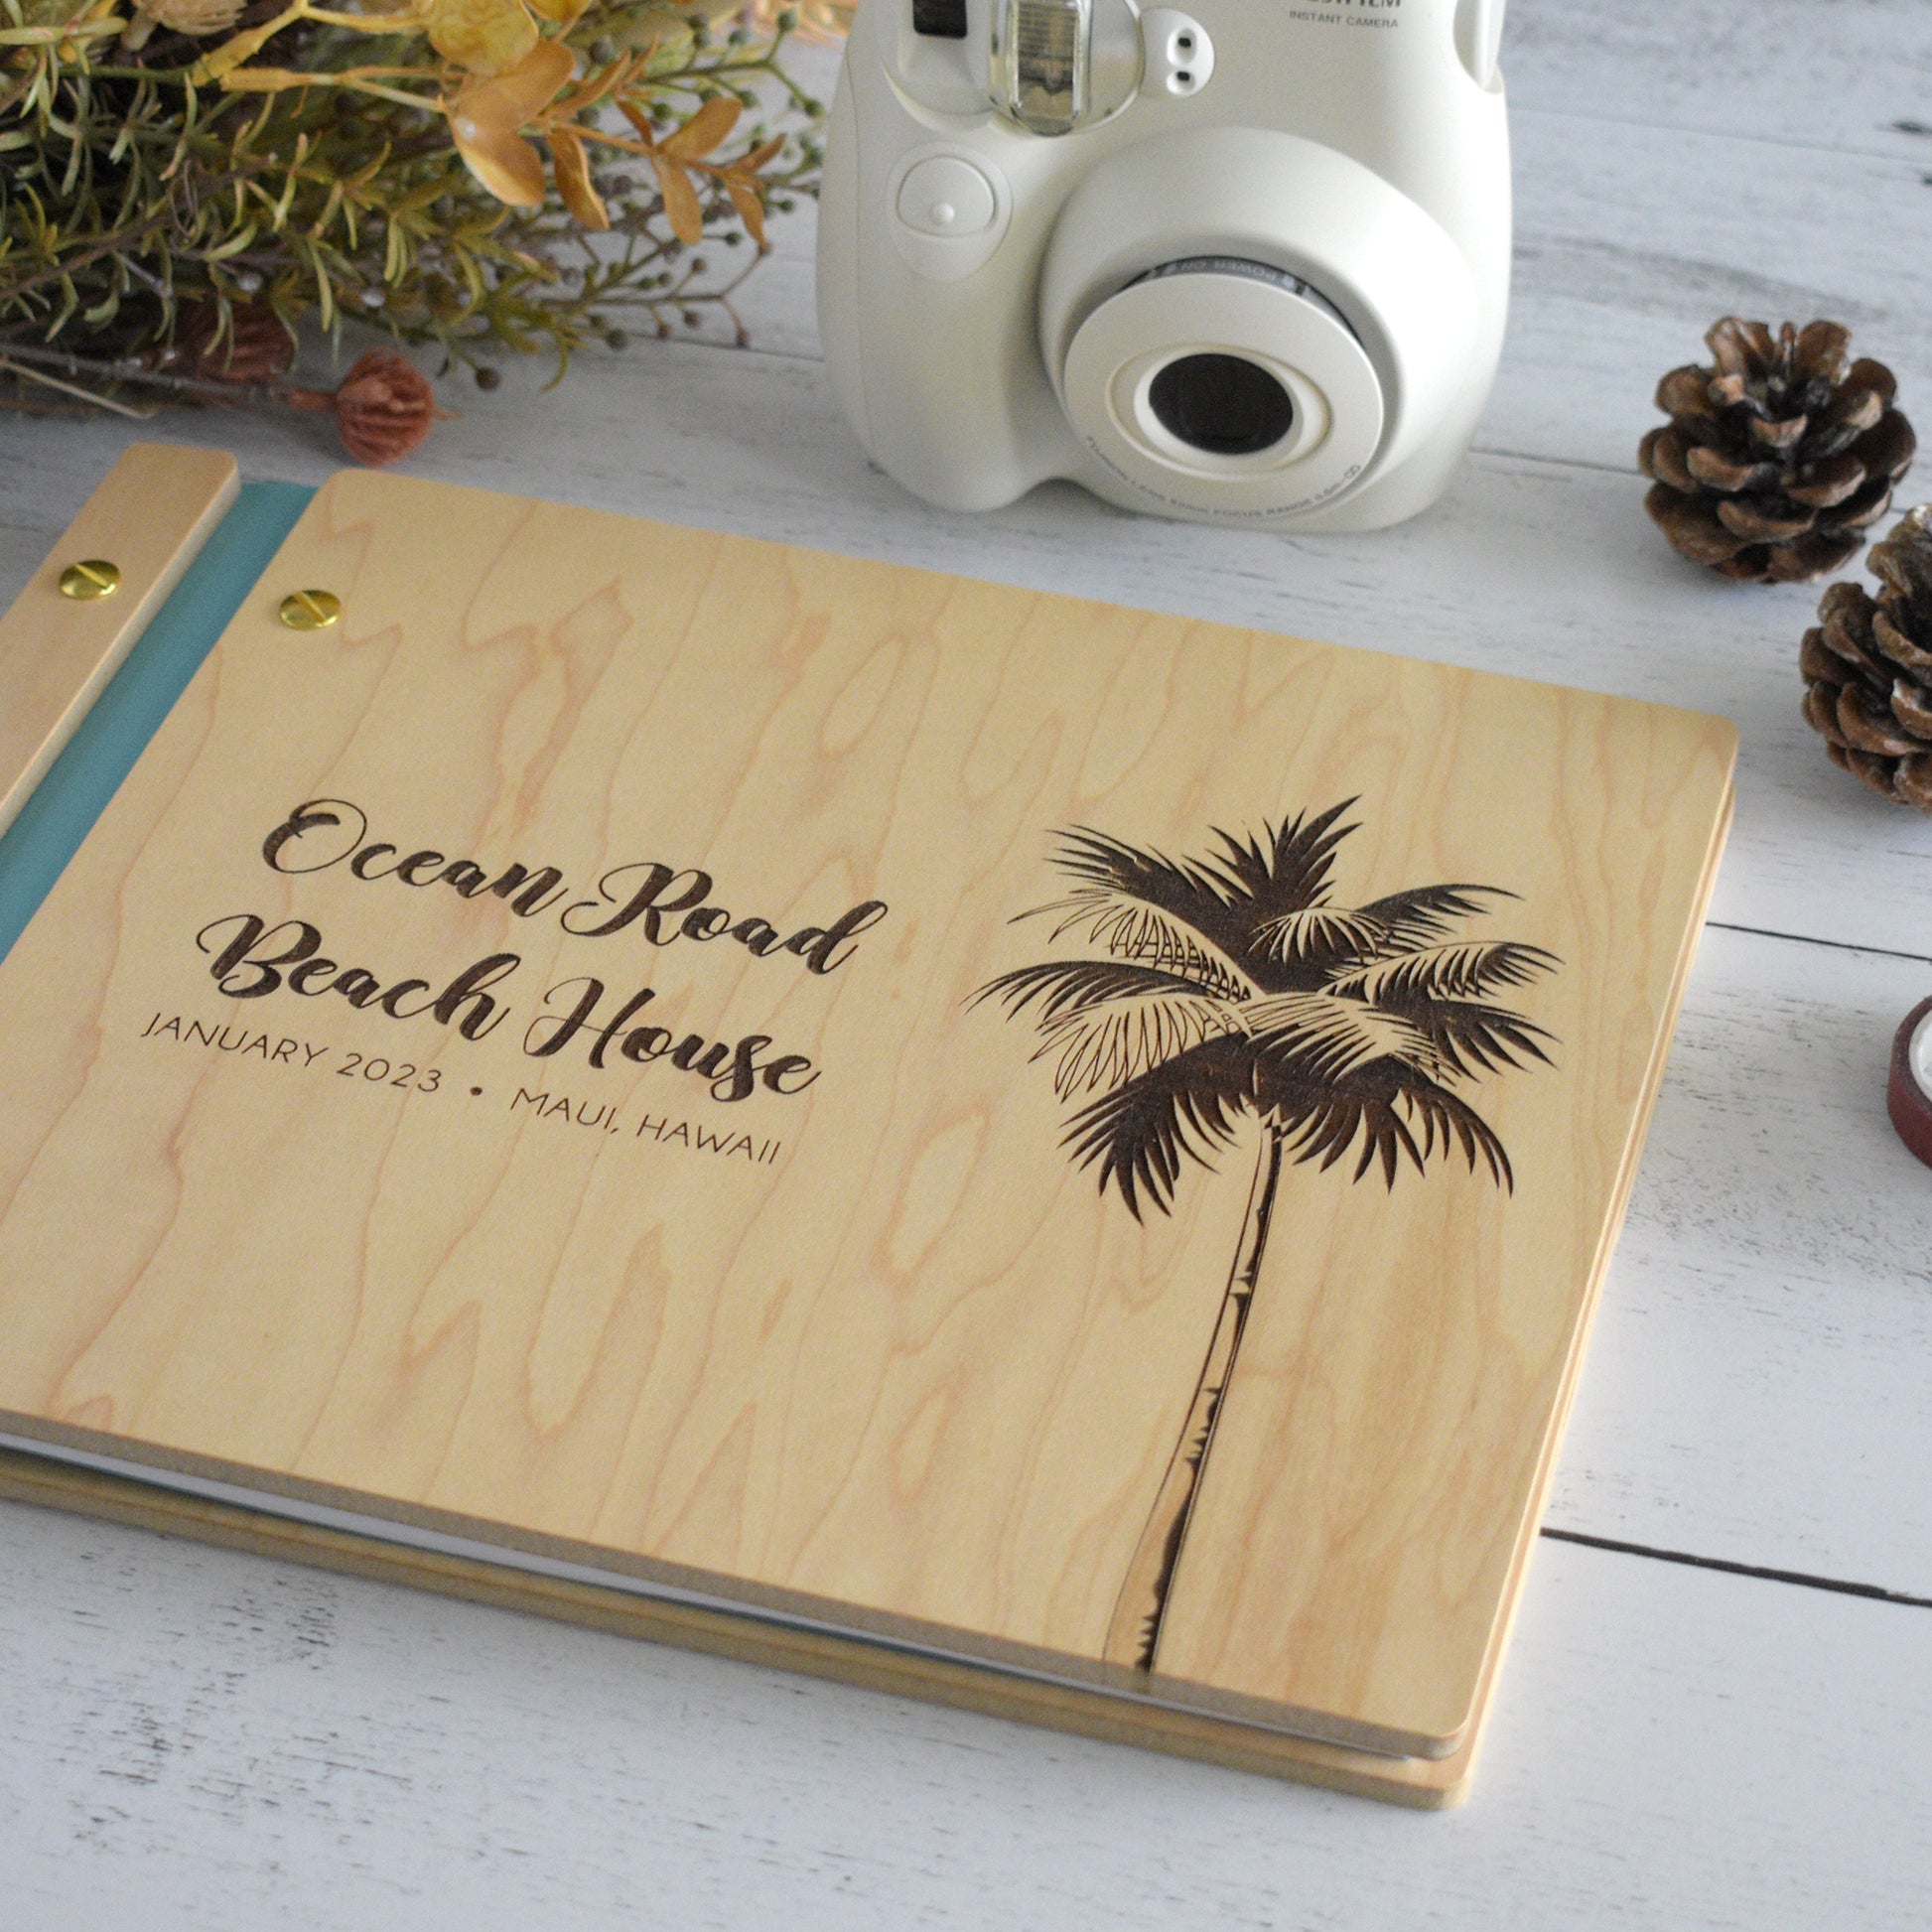 Guest Book for Vacation Home - A Book for Visitors with Comments and Memories Made in Your Vacation Rental Home